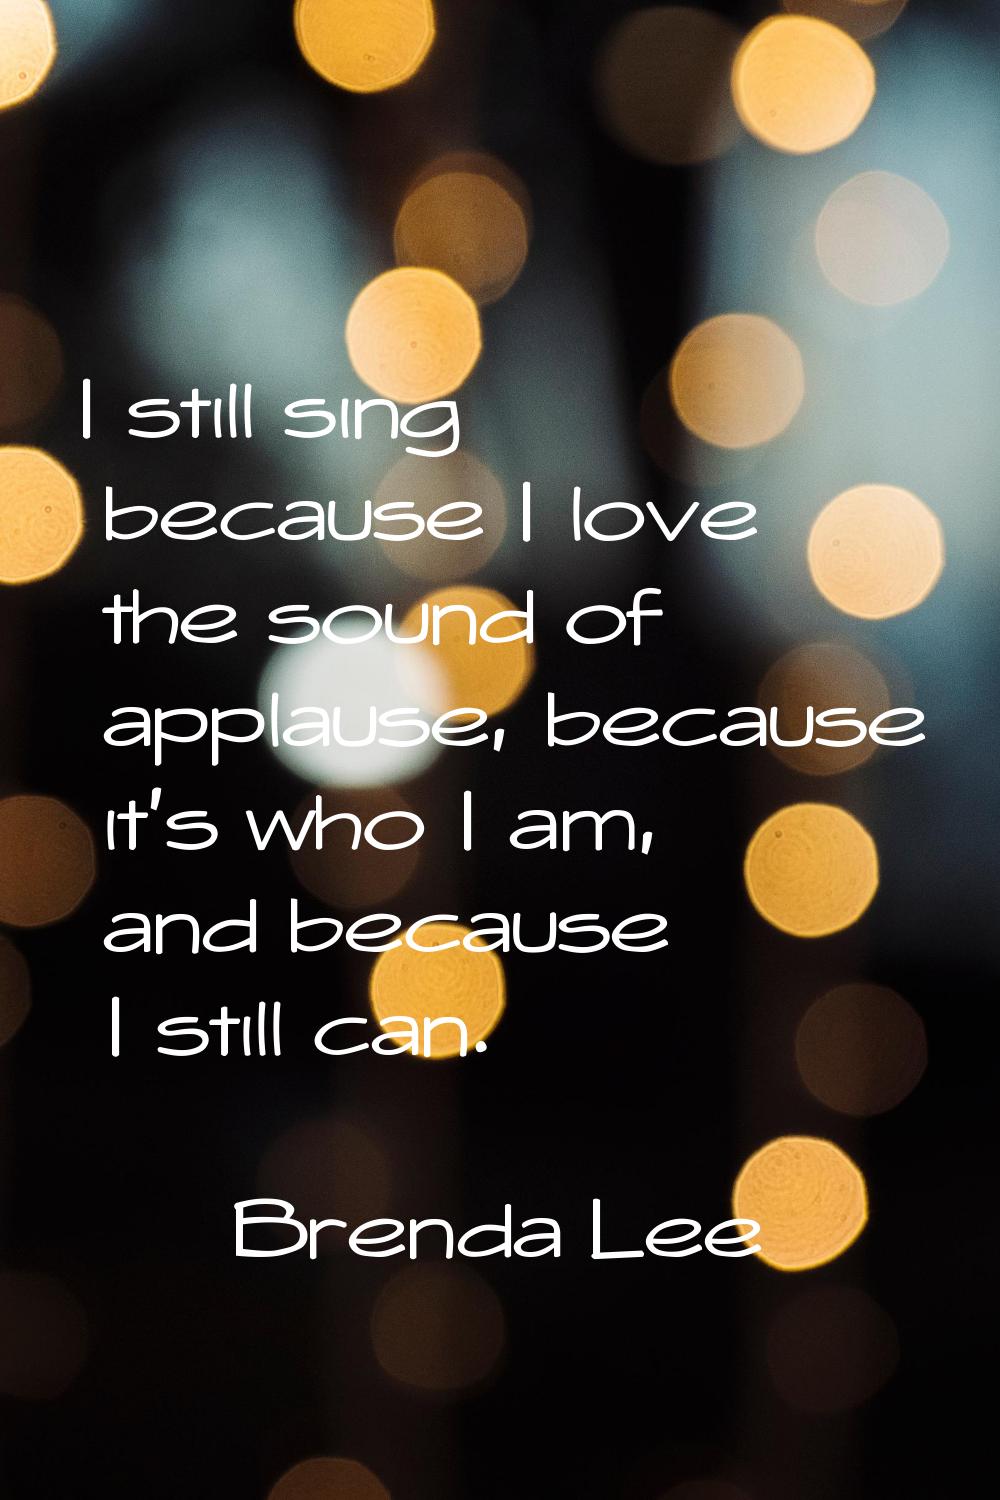 I still sing because I love the sound of applause, because it's who I am, and because I still can.